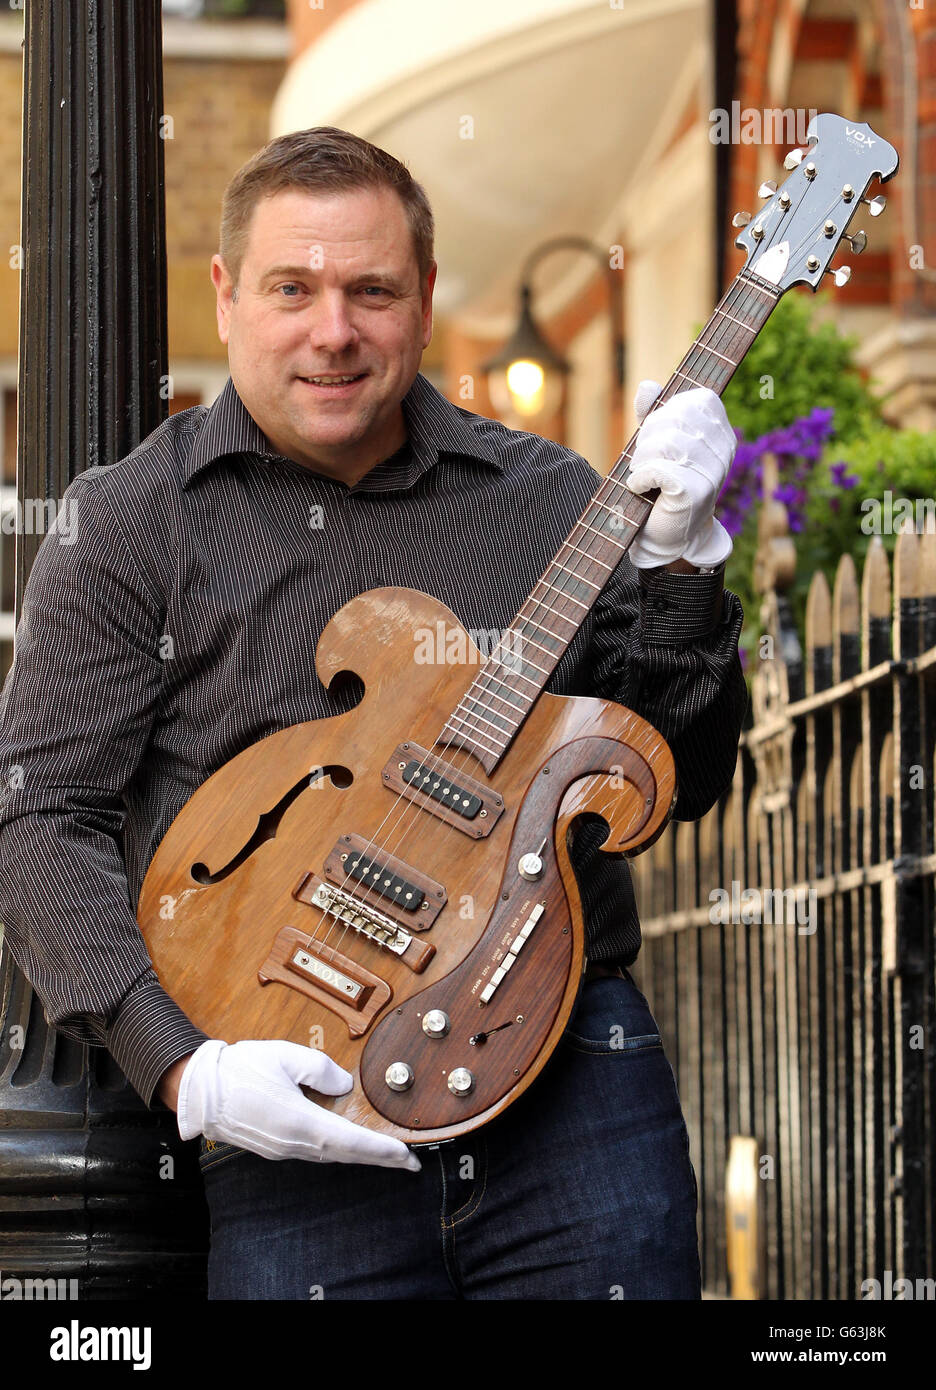 Darren Julien President and CEO of Julien's Auctions with a rare VOX guitar played by George Harrison and John Lennon during The Beatles 1967 Magical Mystery Tour. Stock Photo